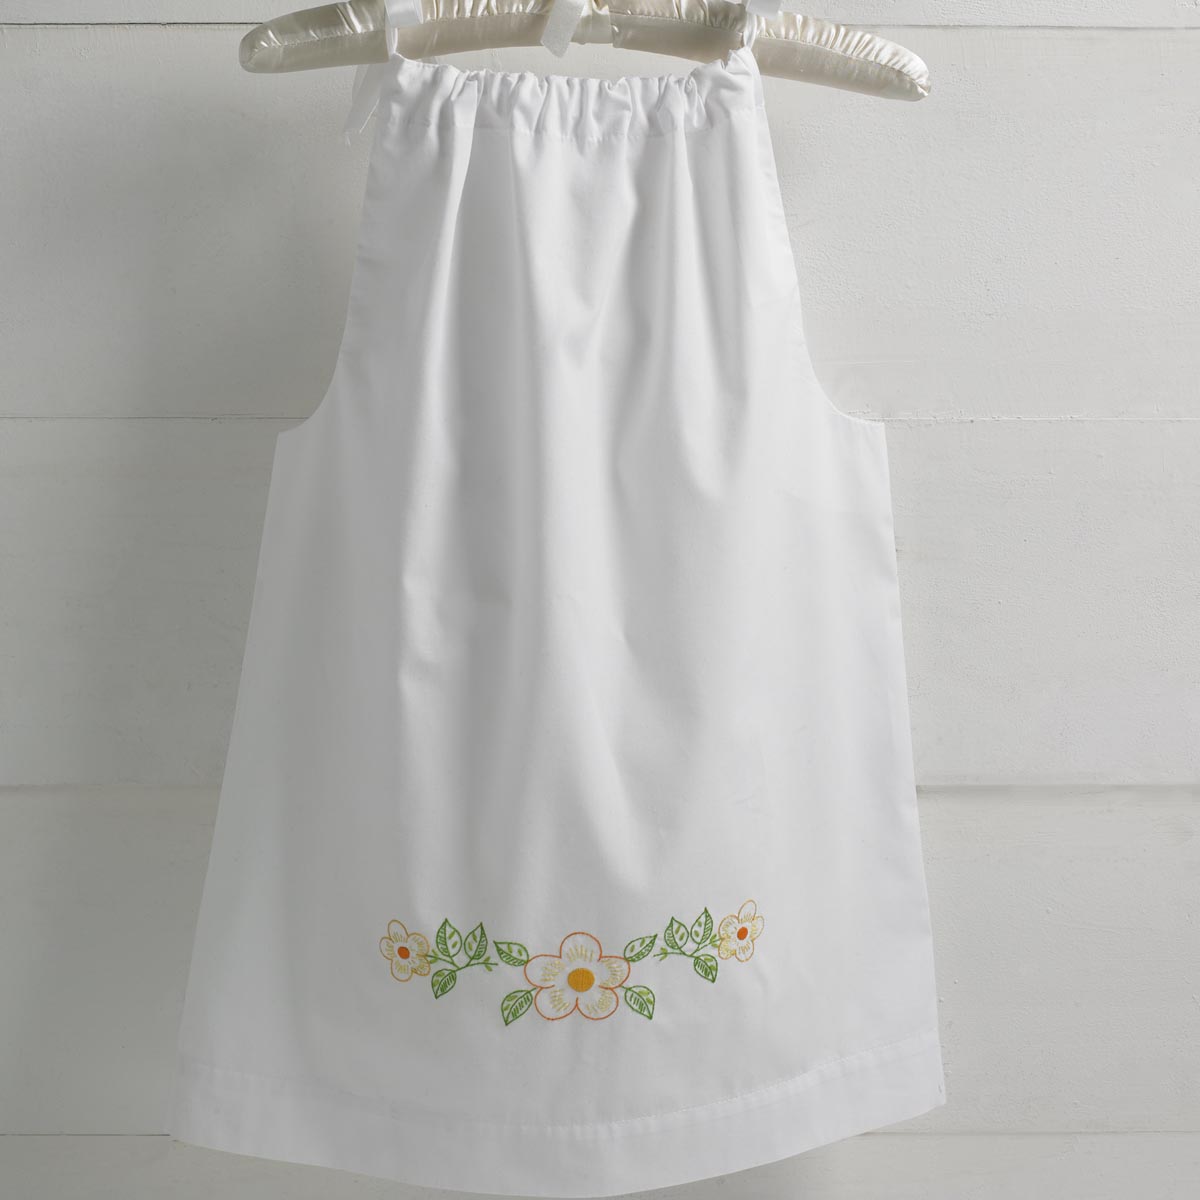 STAMPED PILLOWCASE DRESS - HAPPY FLOWERS